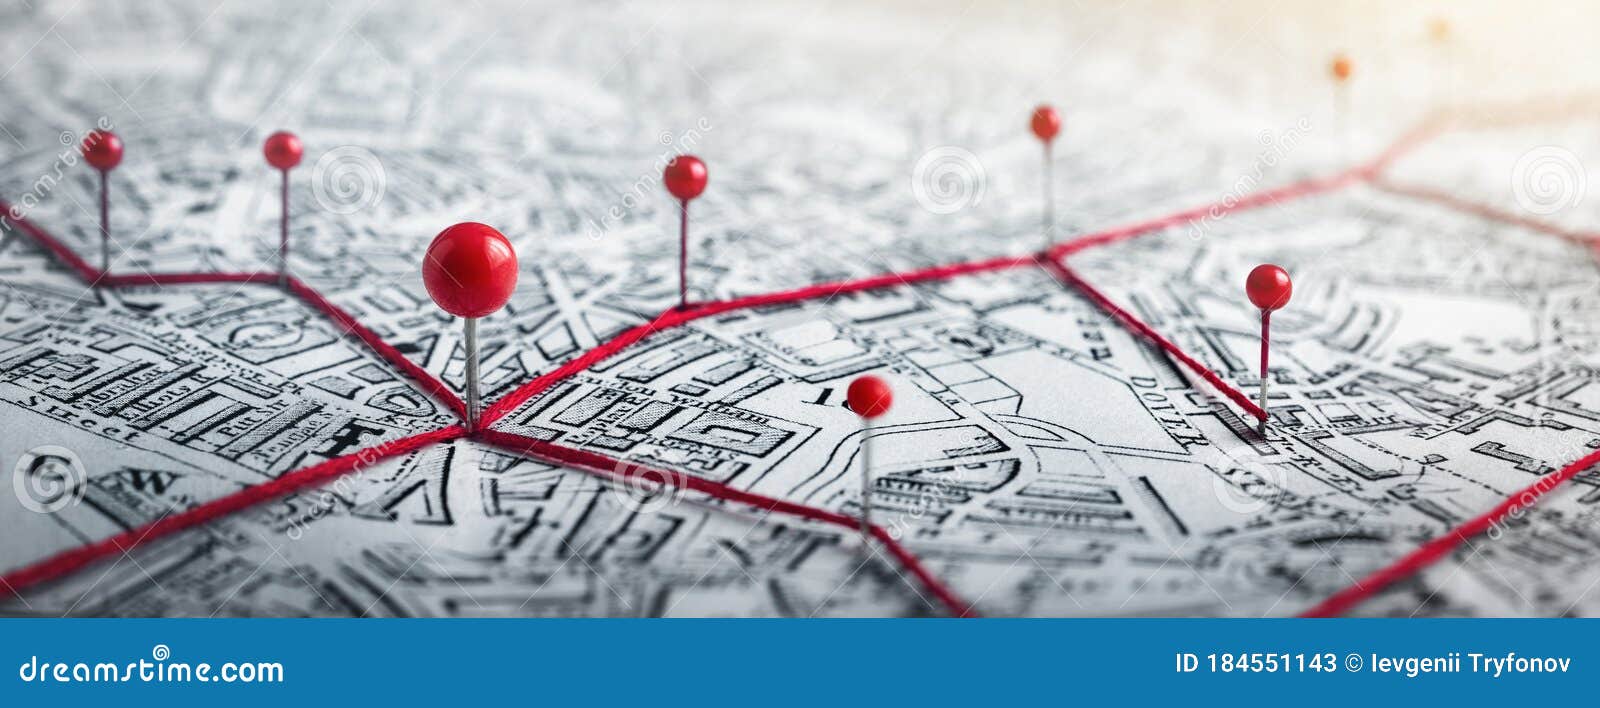 routes with red pins on a city map. concept on the  adventure, discovery, navigation, communication, logistics, geography,